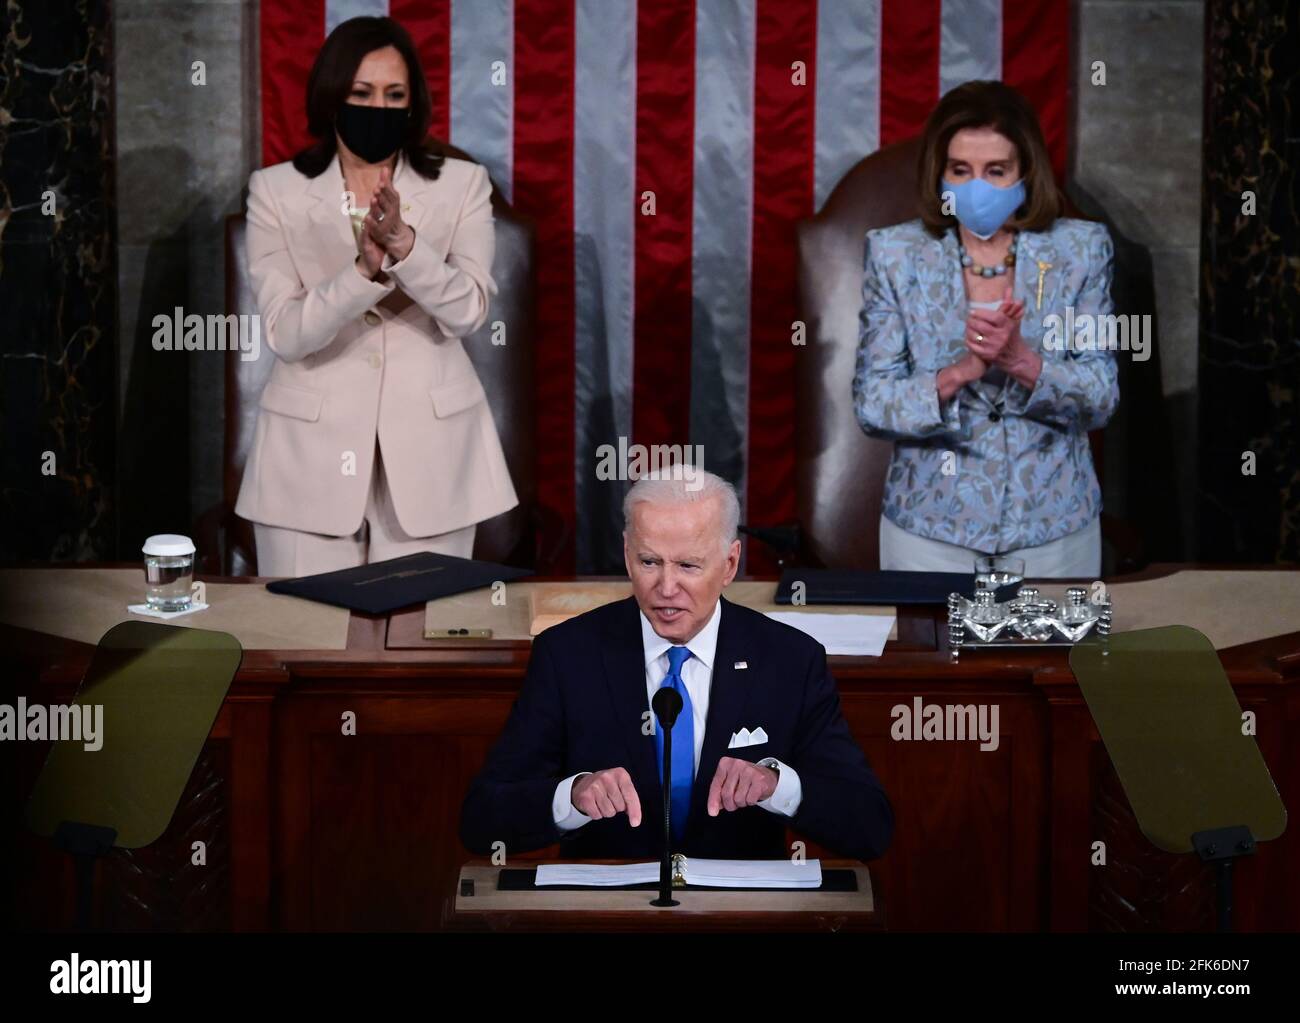 Washington, United States Of America. 28th Apr, 2021. US President Joe Biden addresses a joint session of Congress as US Vice President Kamala Harris (C) and Speaker of the United States House of Representatives Nancy Pelosi (D-CA) react at the US Capitol in Washington, DC, on April 28, 2021. (Photo by Jim WATSON/POOL/AFP)Credit: Jim Watson/Pool via CNP Photo via Credit: Newscom/Alamy Live News Stock Photo